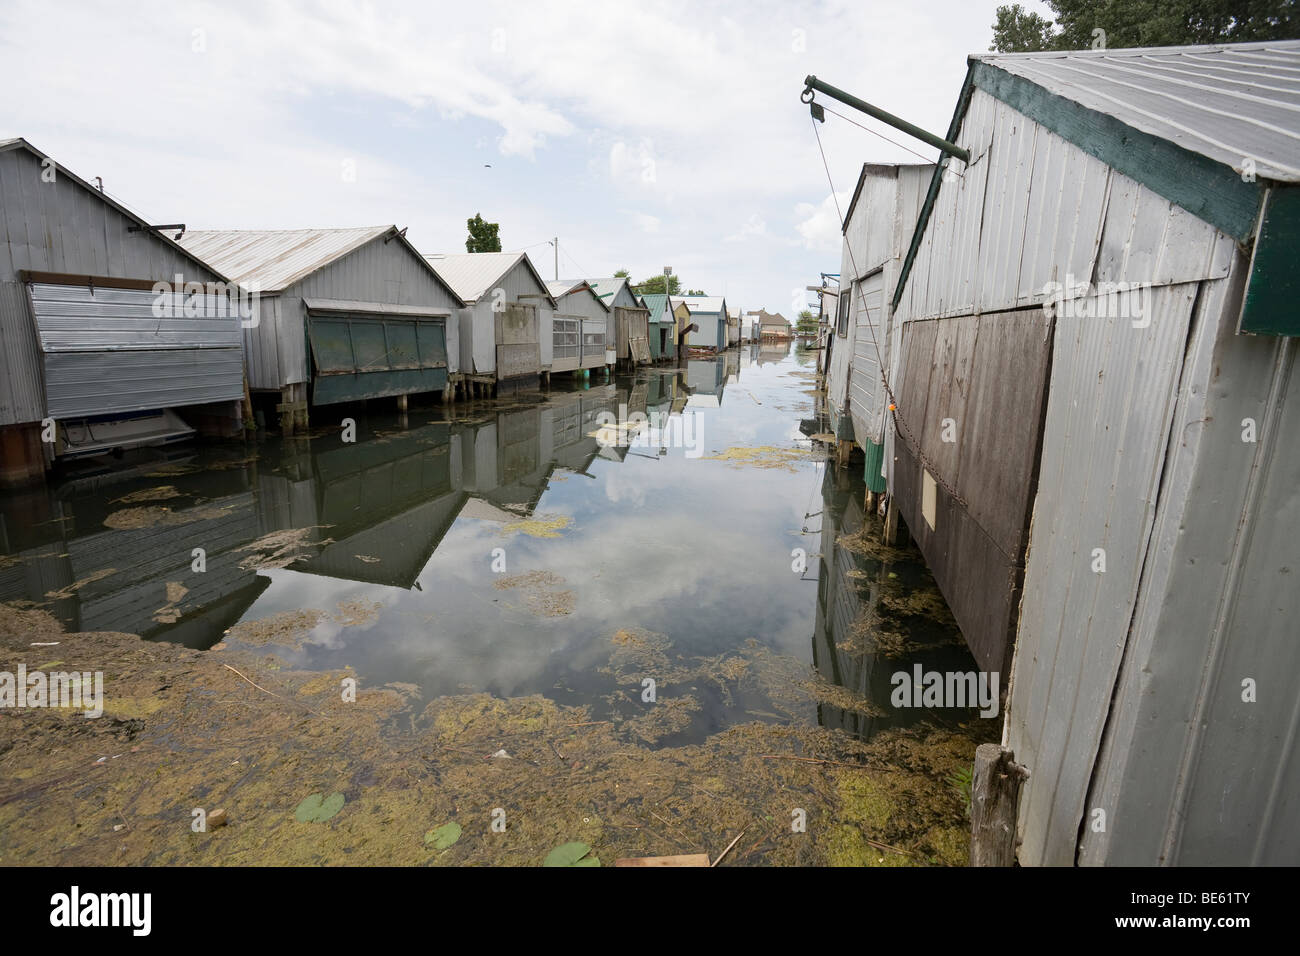 Boat Houses at Long Point. A double row of worn boathouses lines a channel in this small lake Erie community Stock Photo